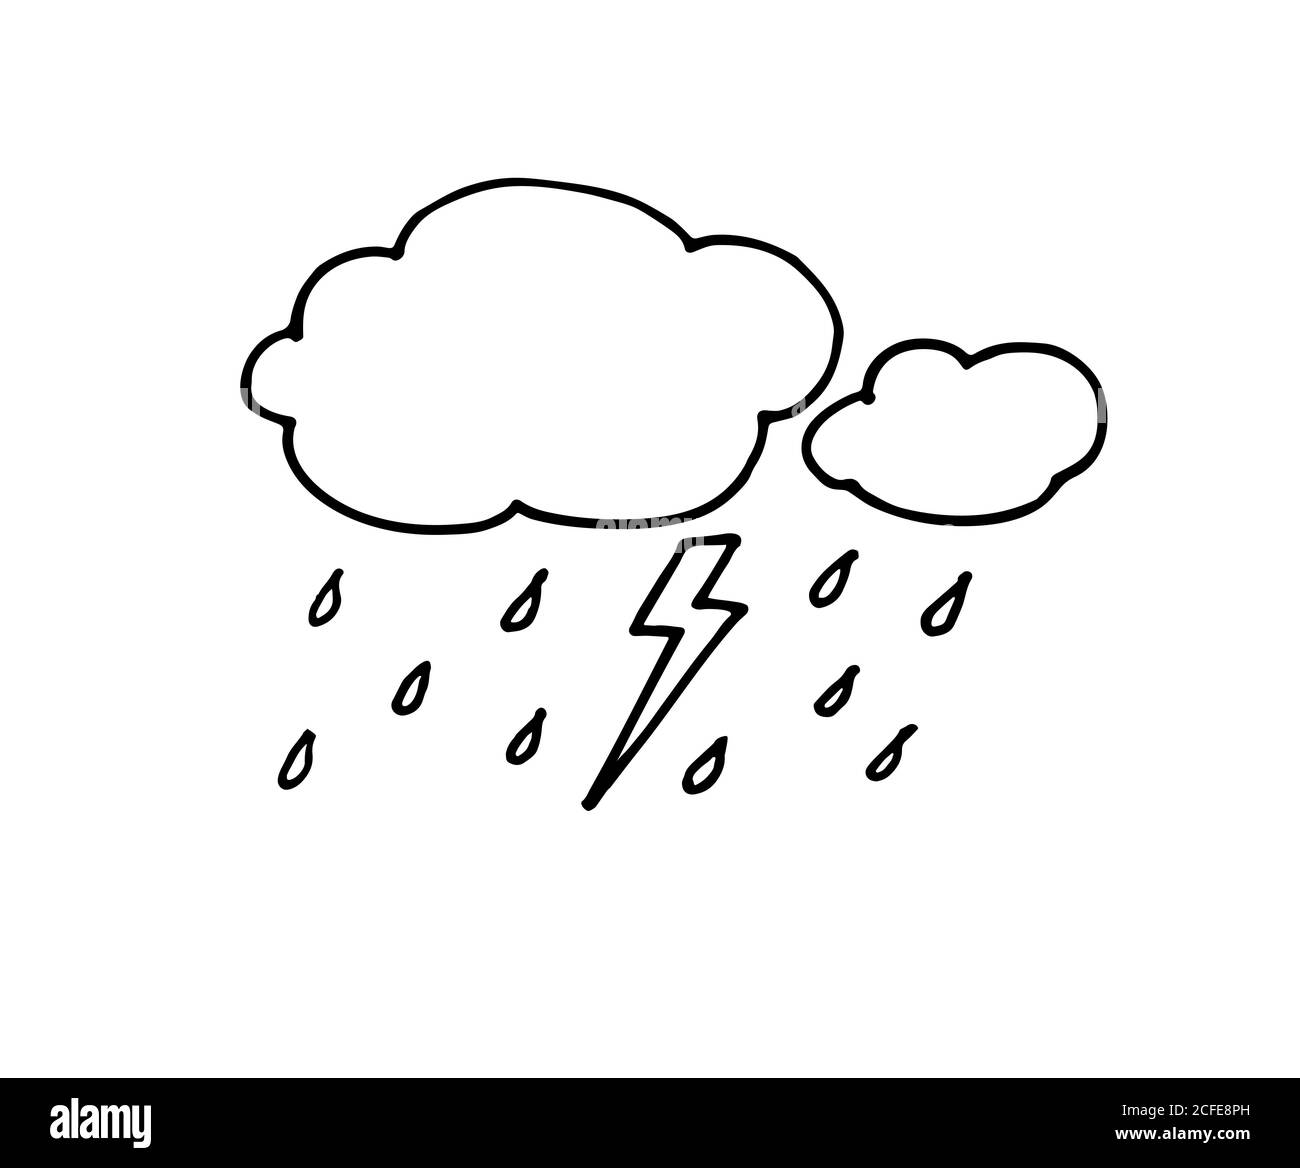 Hand drawn doodle rainy clouds with drops. Vector illustration isolated ...